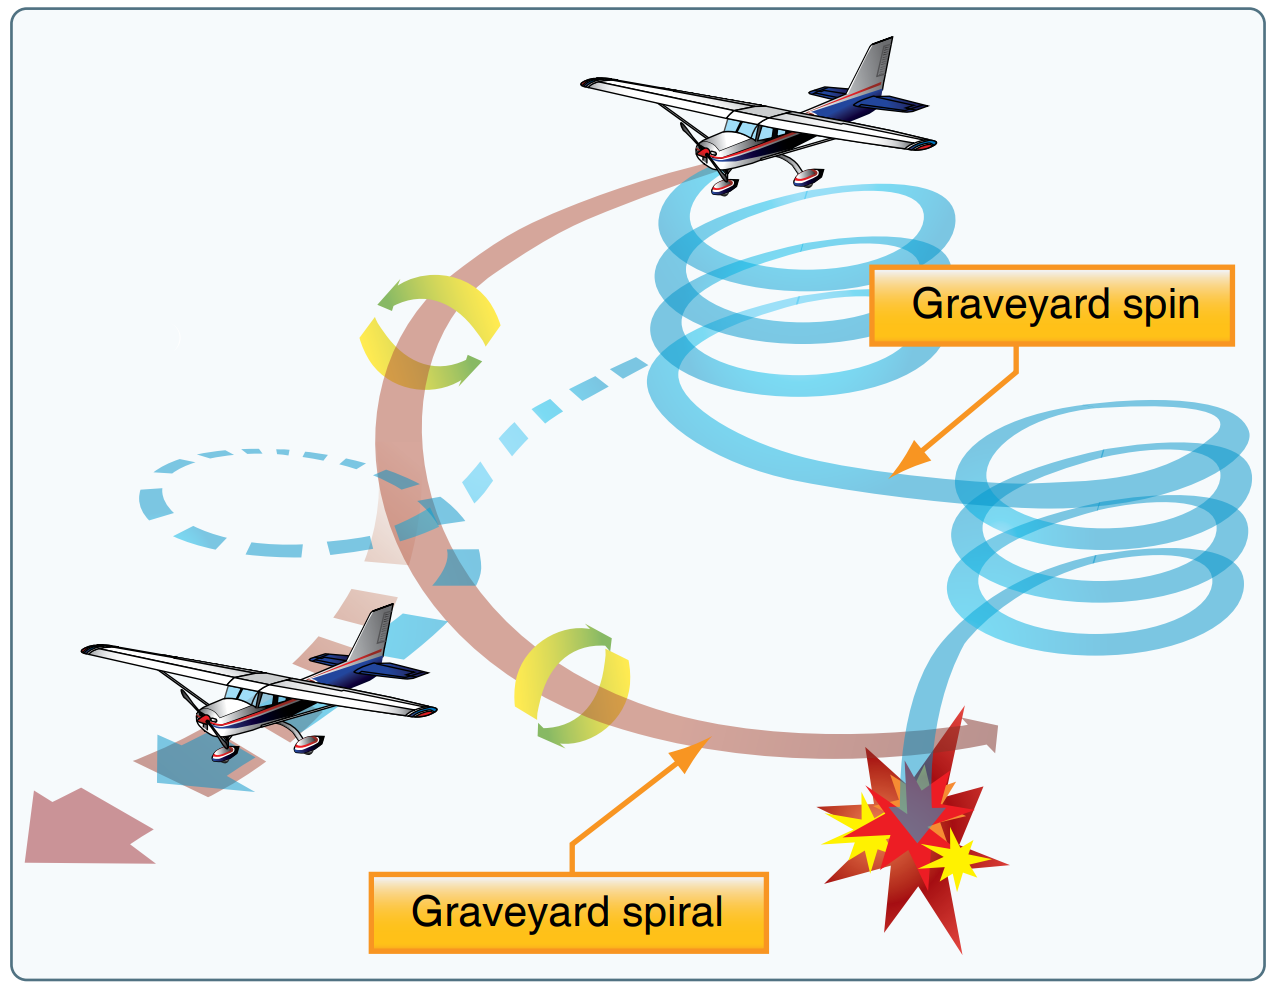 A diagram of a graveyard spin and spiral.